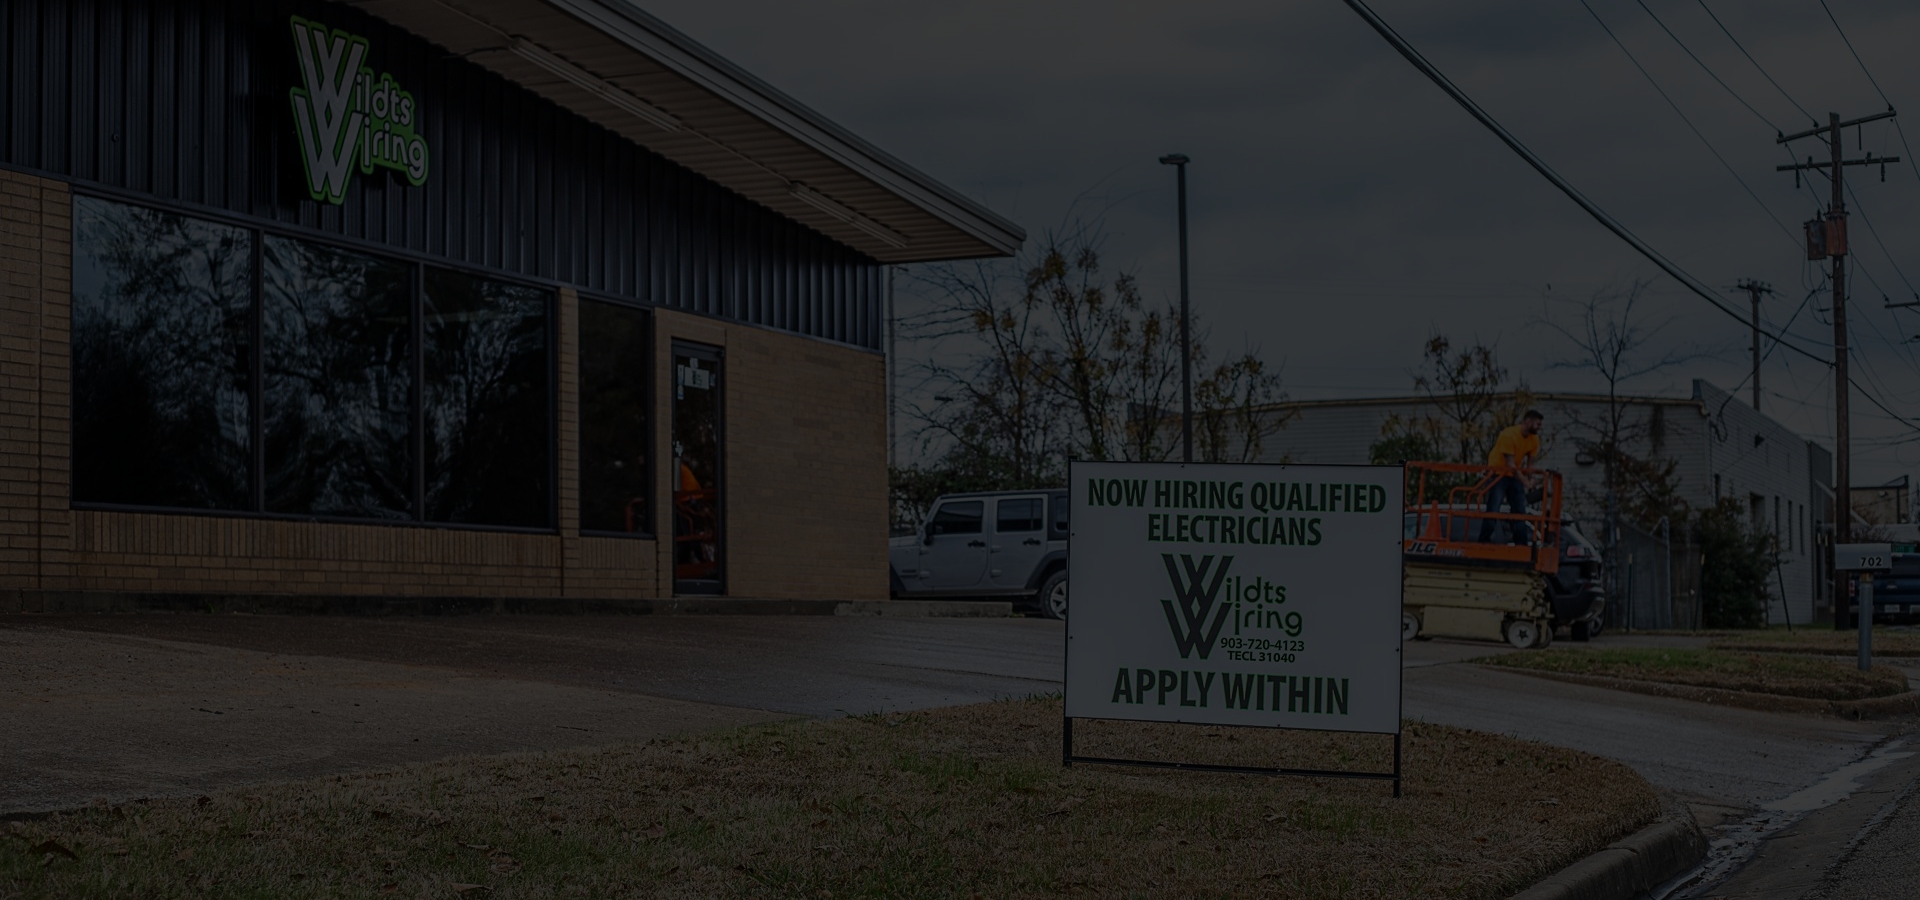 Wildts Wiring is looking to hire experienced and knowledgable electricians!